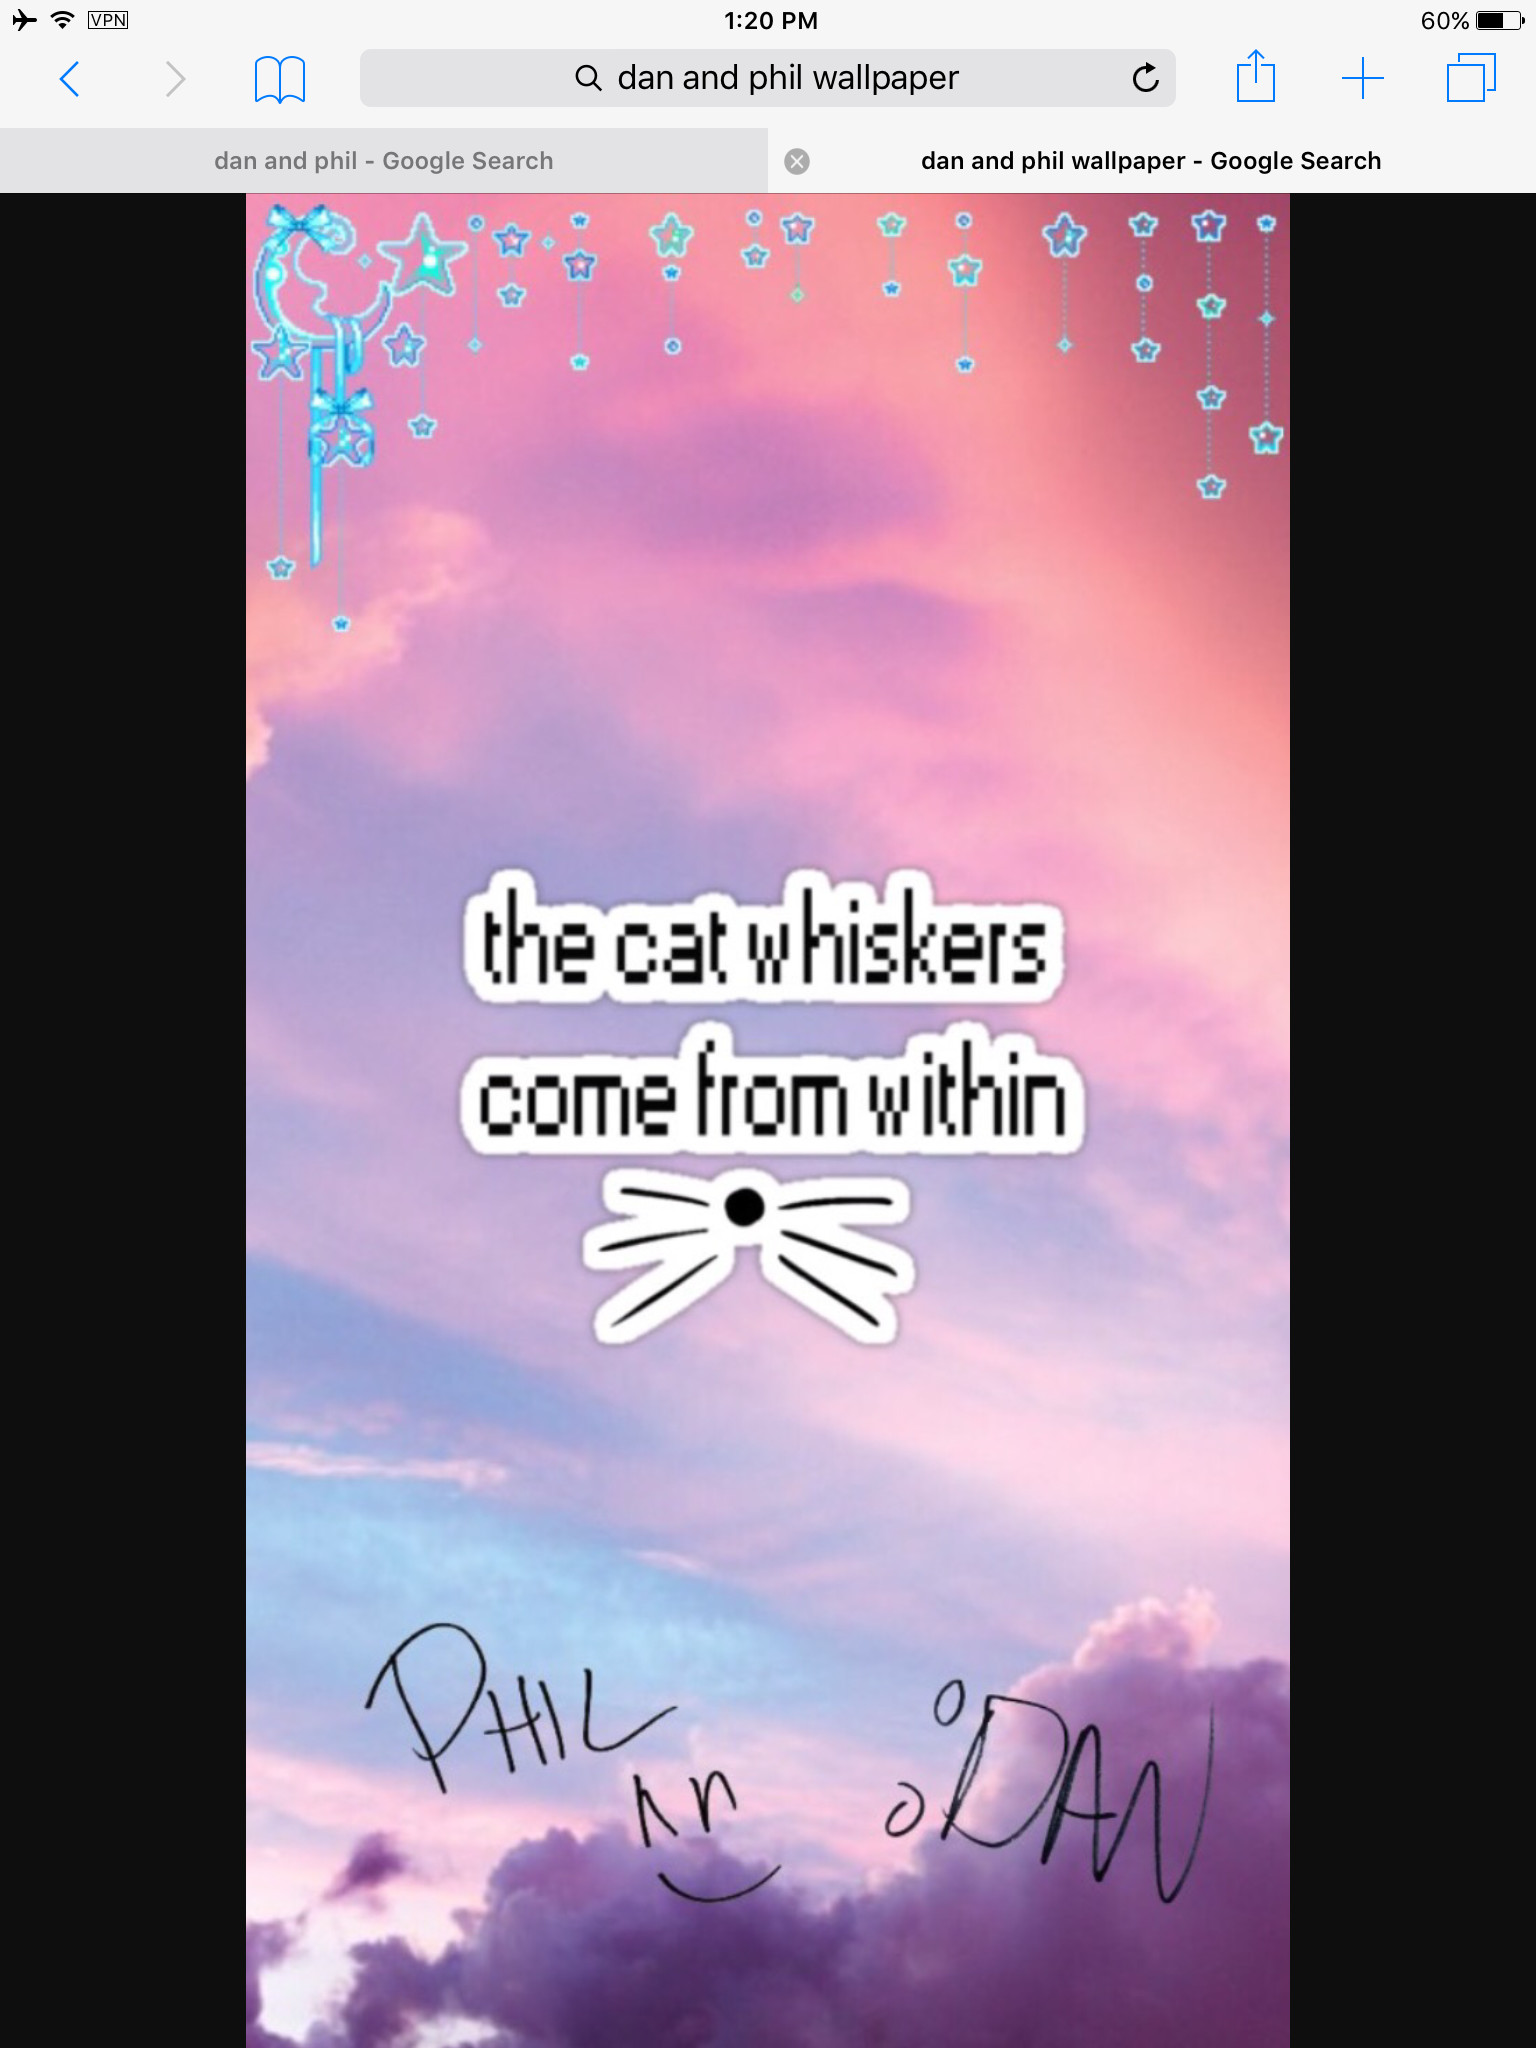 1536x2048 Cat Whiskers Png Transpa Images For. Cat Whiskers Dan And Phil ...